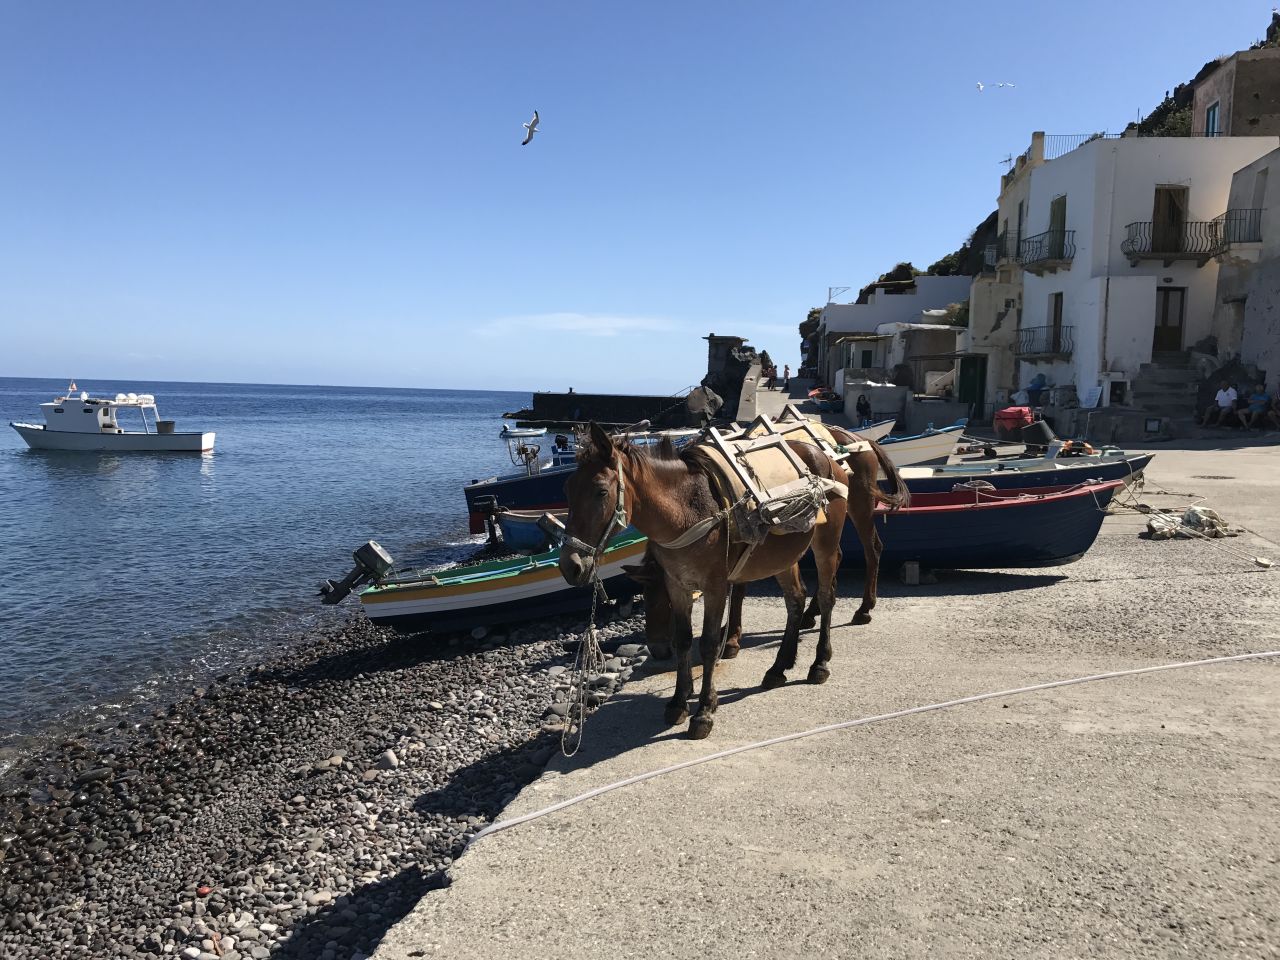 There are no roads and the various levels of the villages are connected by more than 4,000 rough steps. Donkeys will carry your luggage, but the reward for the workout is a breathtaking panorama from the top of the town. 